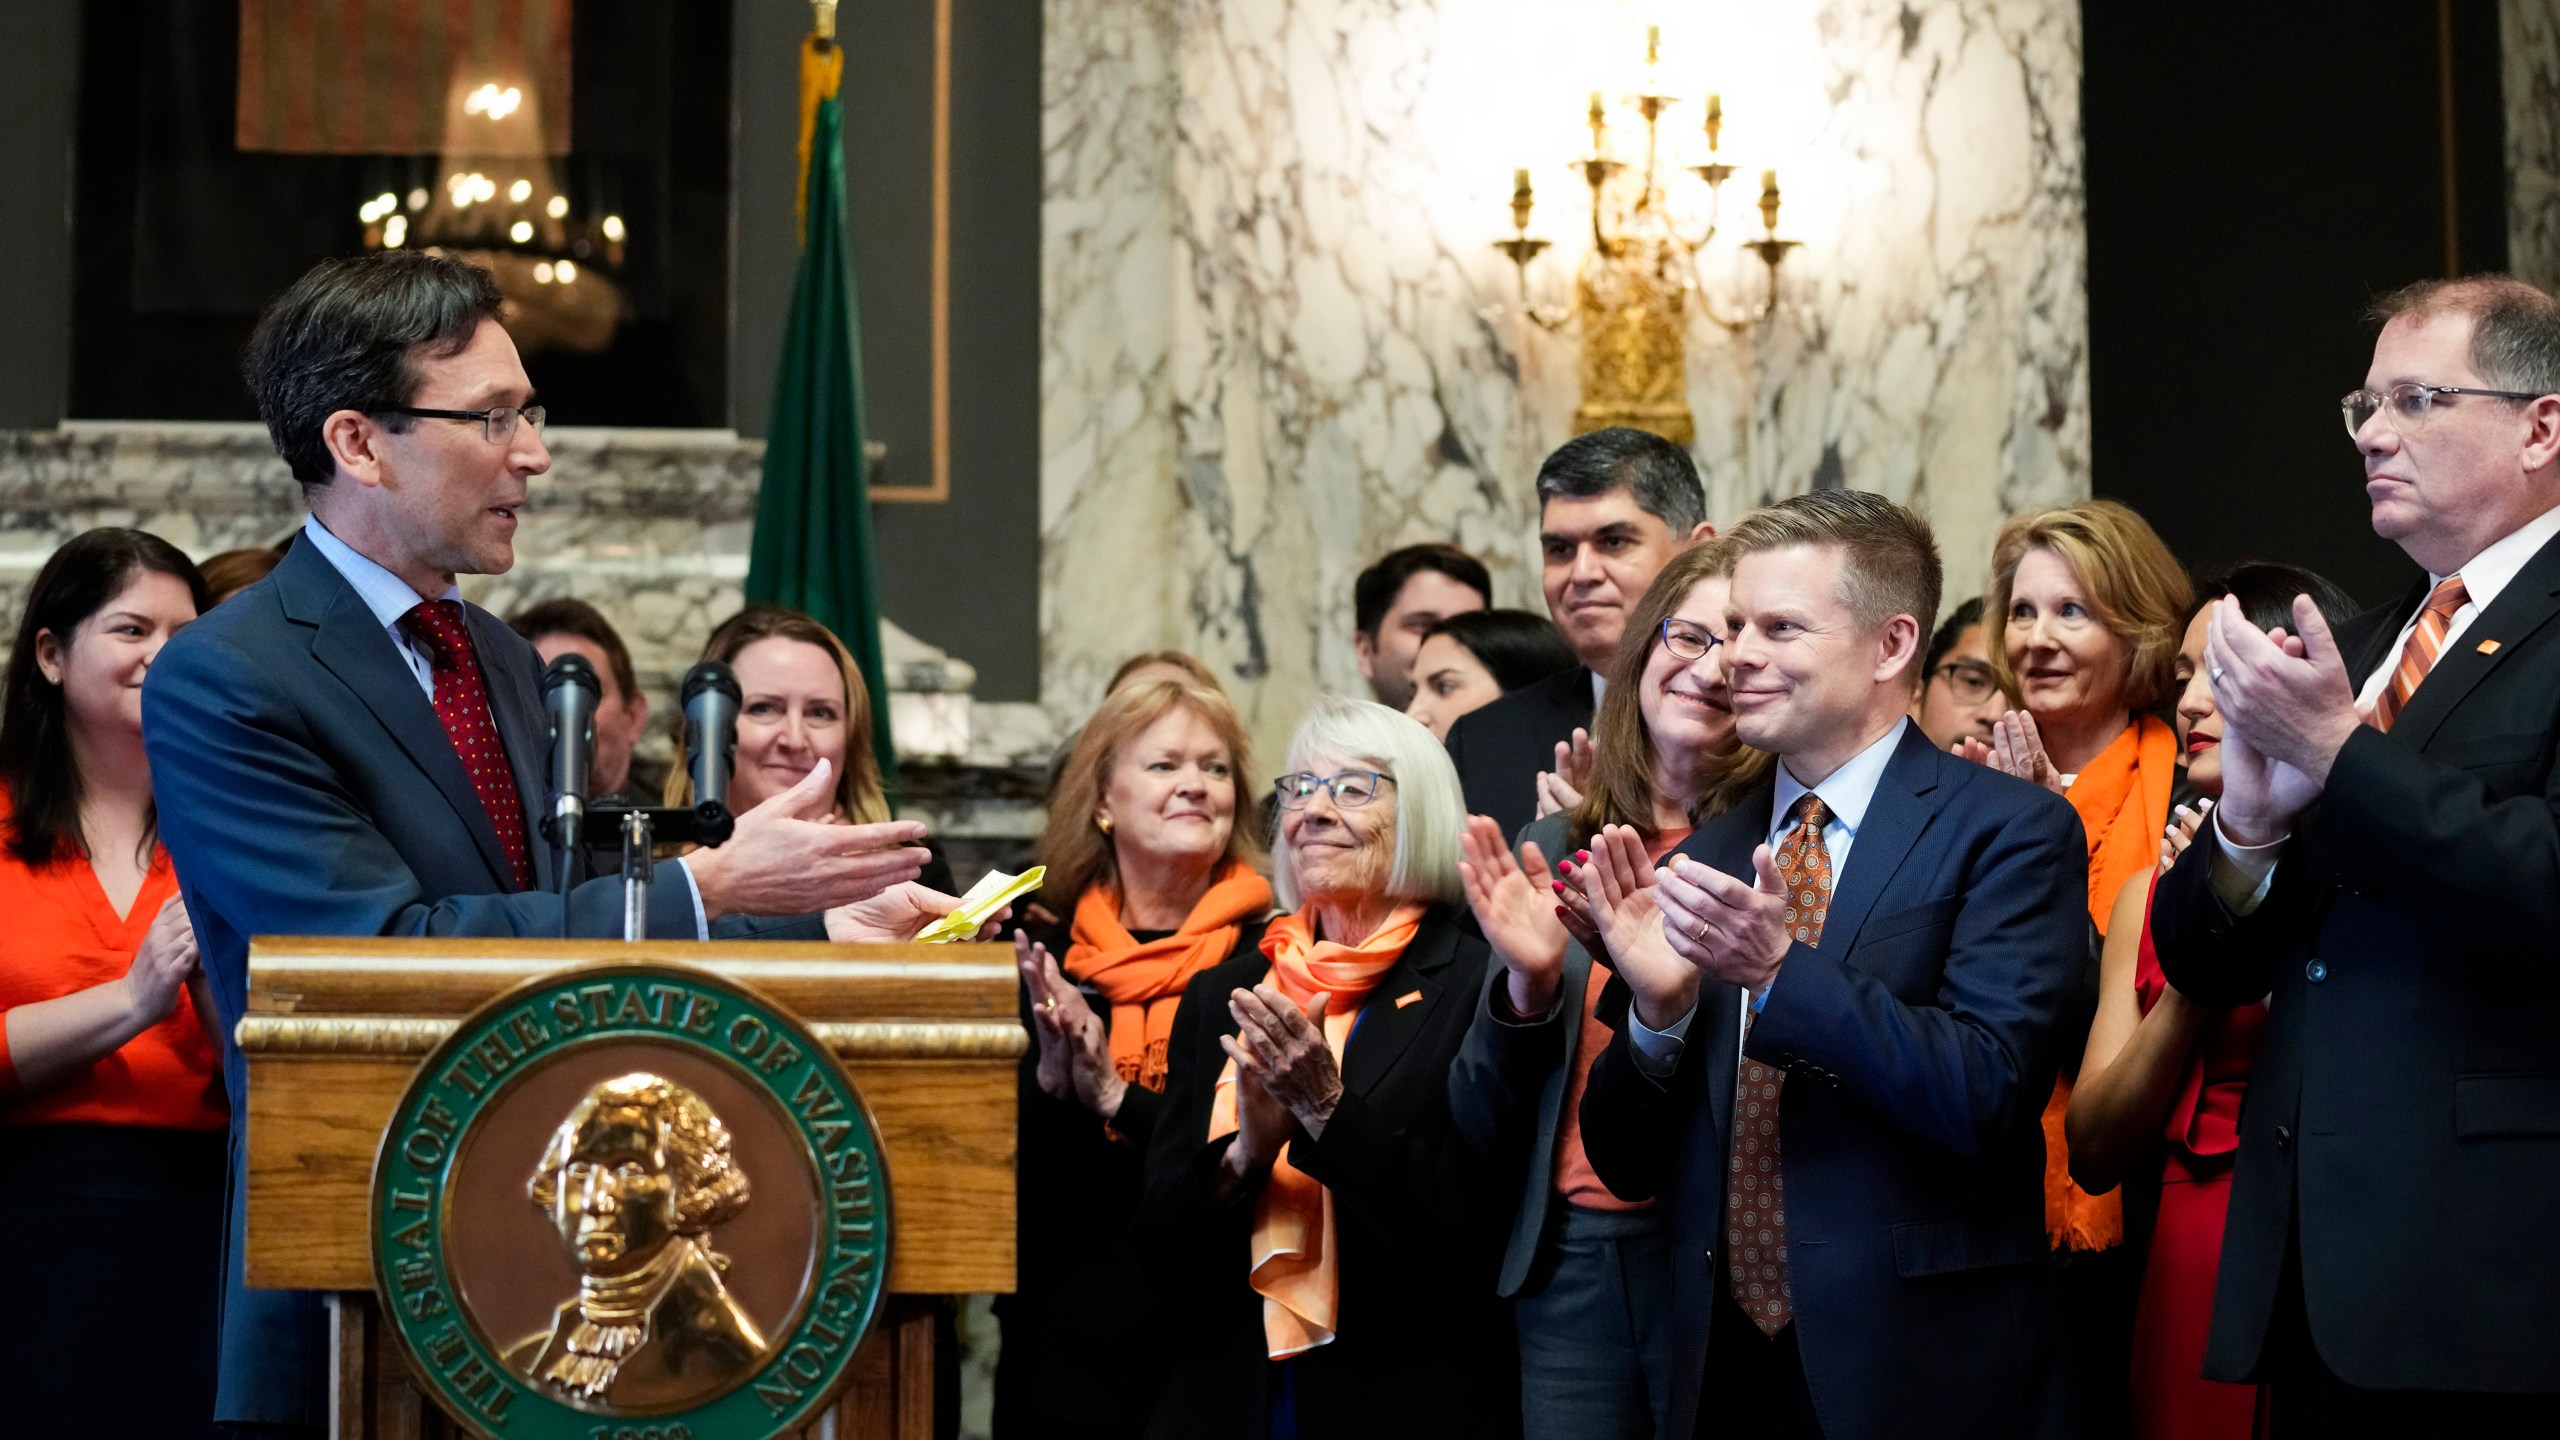 FILE -Washington Attorney General Bob Ferguson introduces Sen. Jamie Pedersen, D-Seattle, second from right, after making remarks Tuesday, April 25, 2023, at the Capitol in Olympia, Wash. A federal judge on Friday, March 8, 2024 rejected a challenge to a Washington state law that cleared the way for lawsuits against the gun industry in certain cases. The measure was one of three bills signed by Democratic Gov. Jay Inslee last year seeking to address gun violence. (AP Photo/Lindsey Wasson, File)